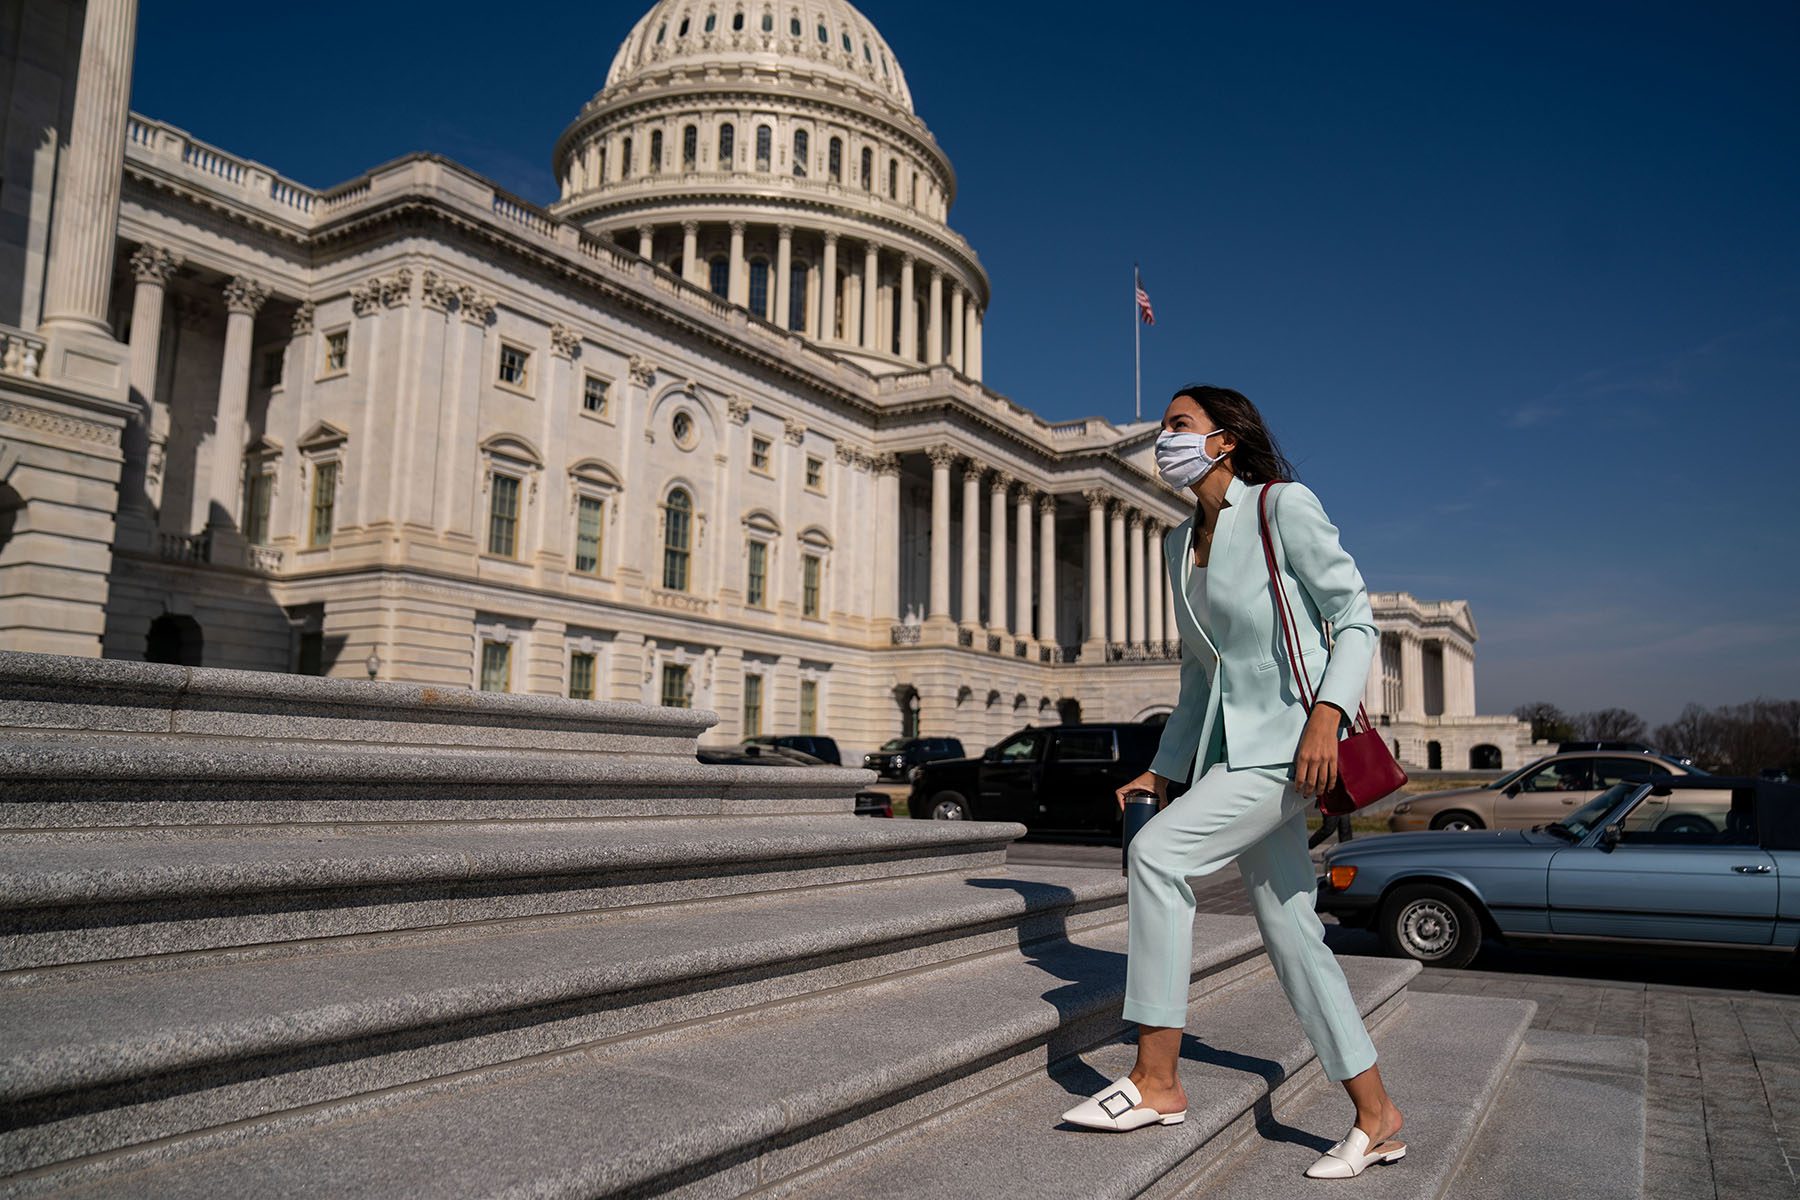 Alexandria Ocasio-Cortez walks up the steps to the House on Capitol Hill.